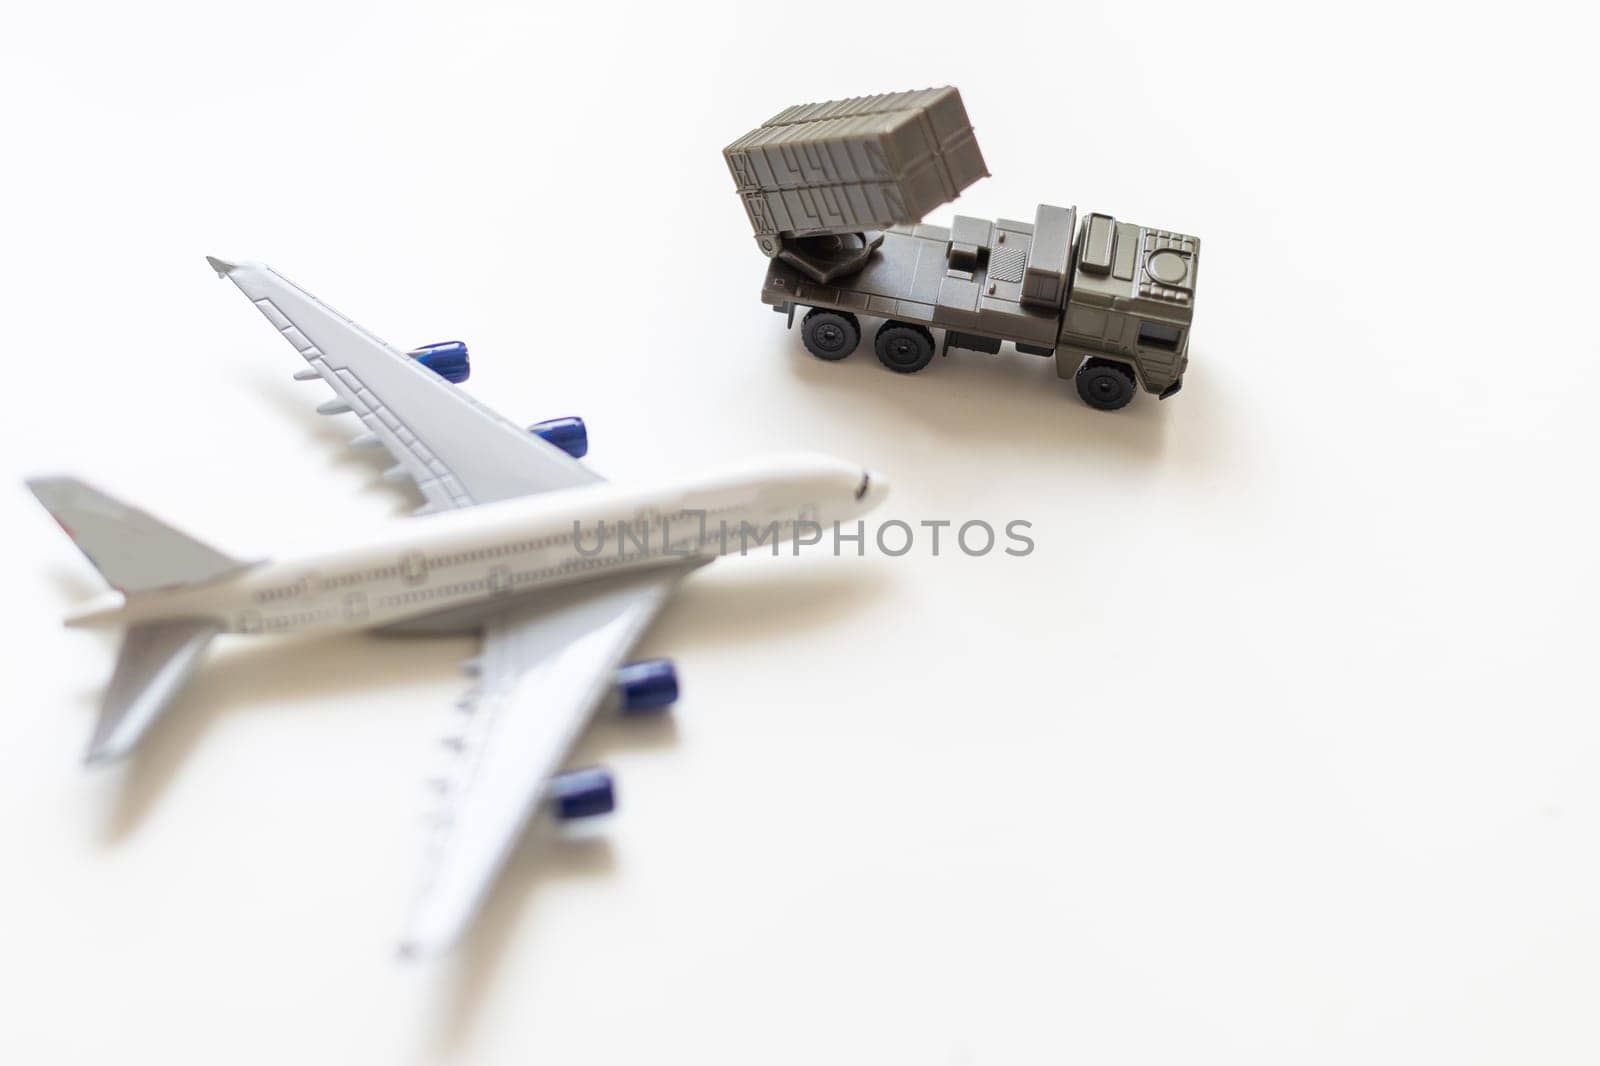 Top view on plastic model military vehicle and aircraft by Andelov13